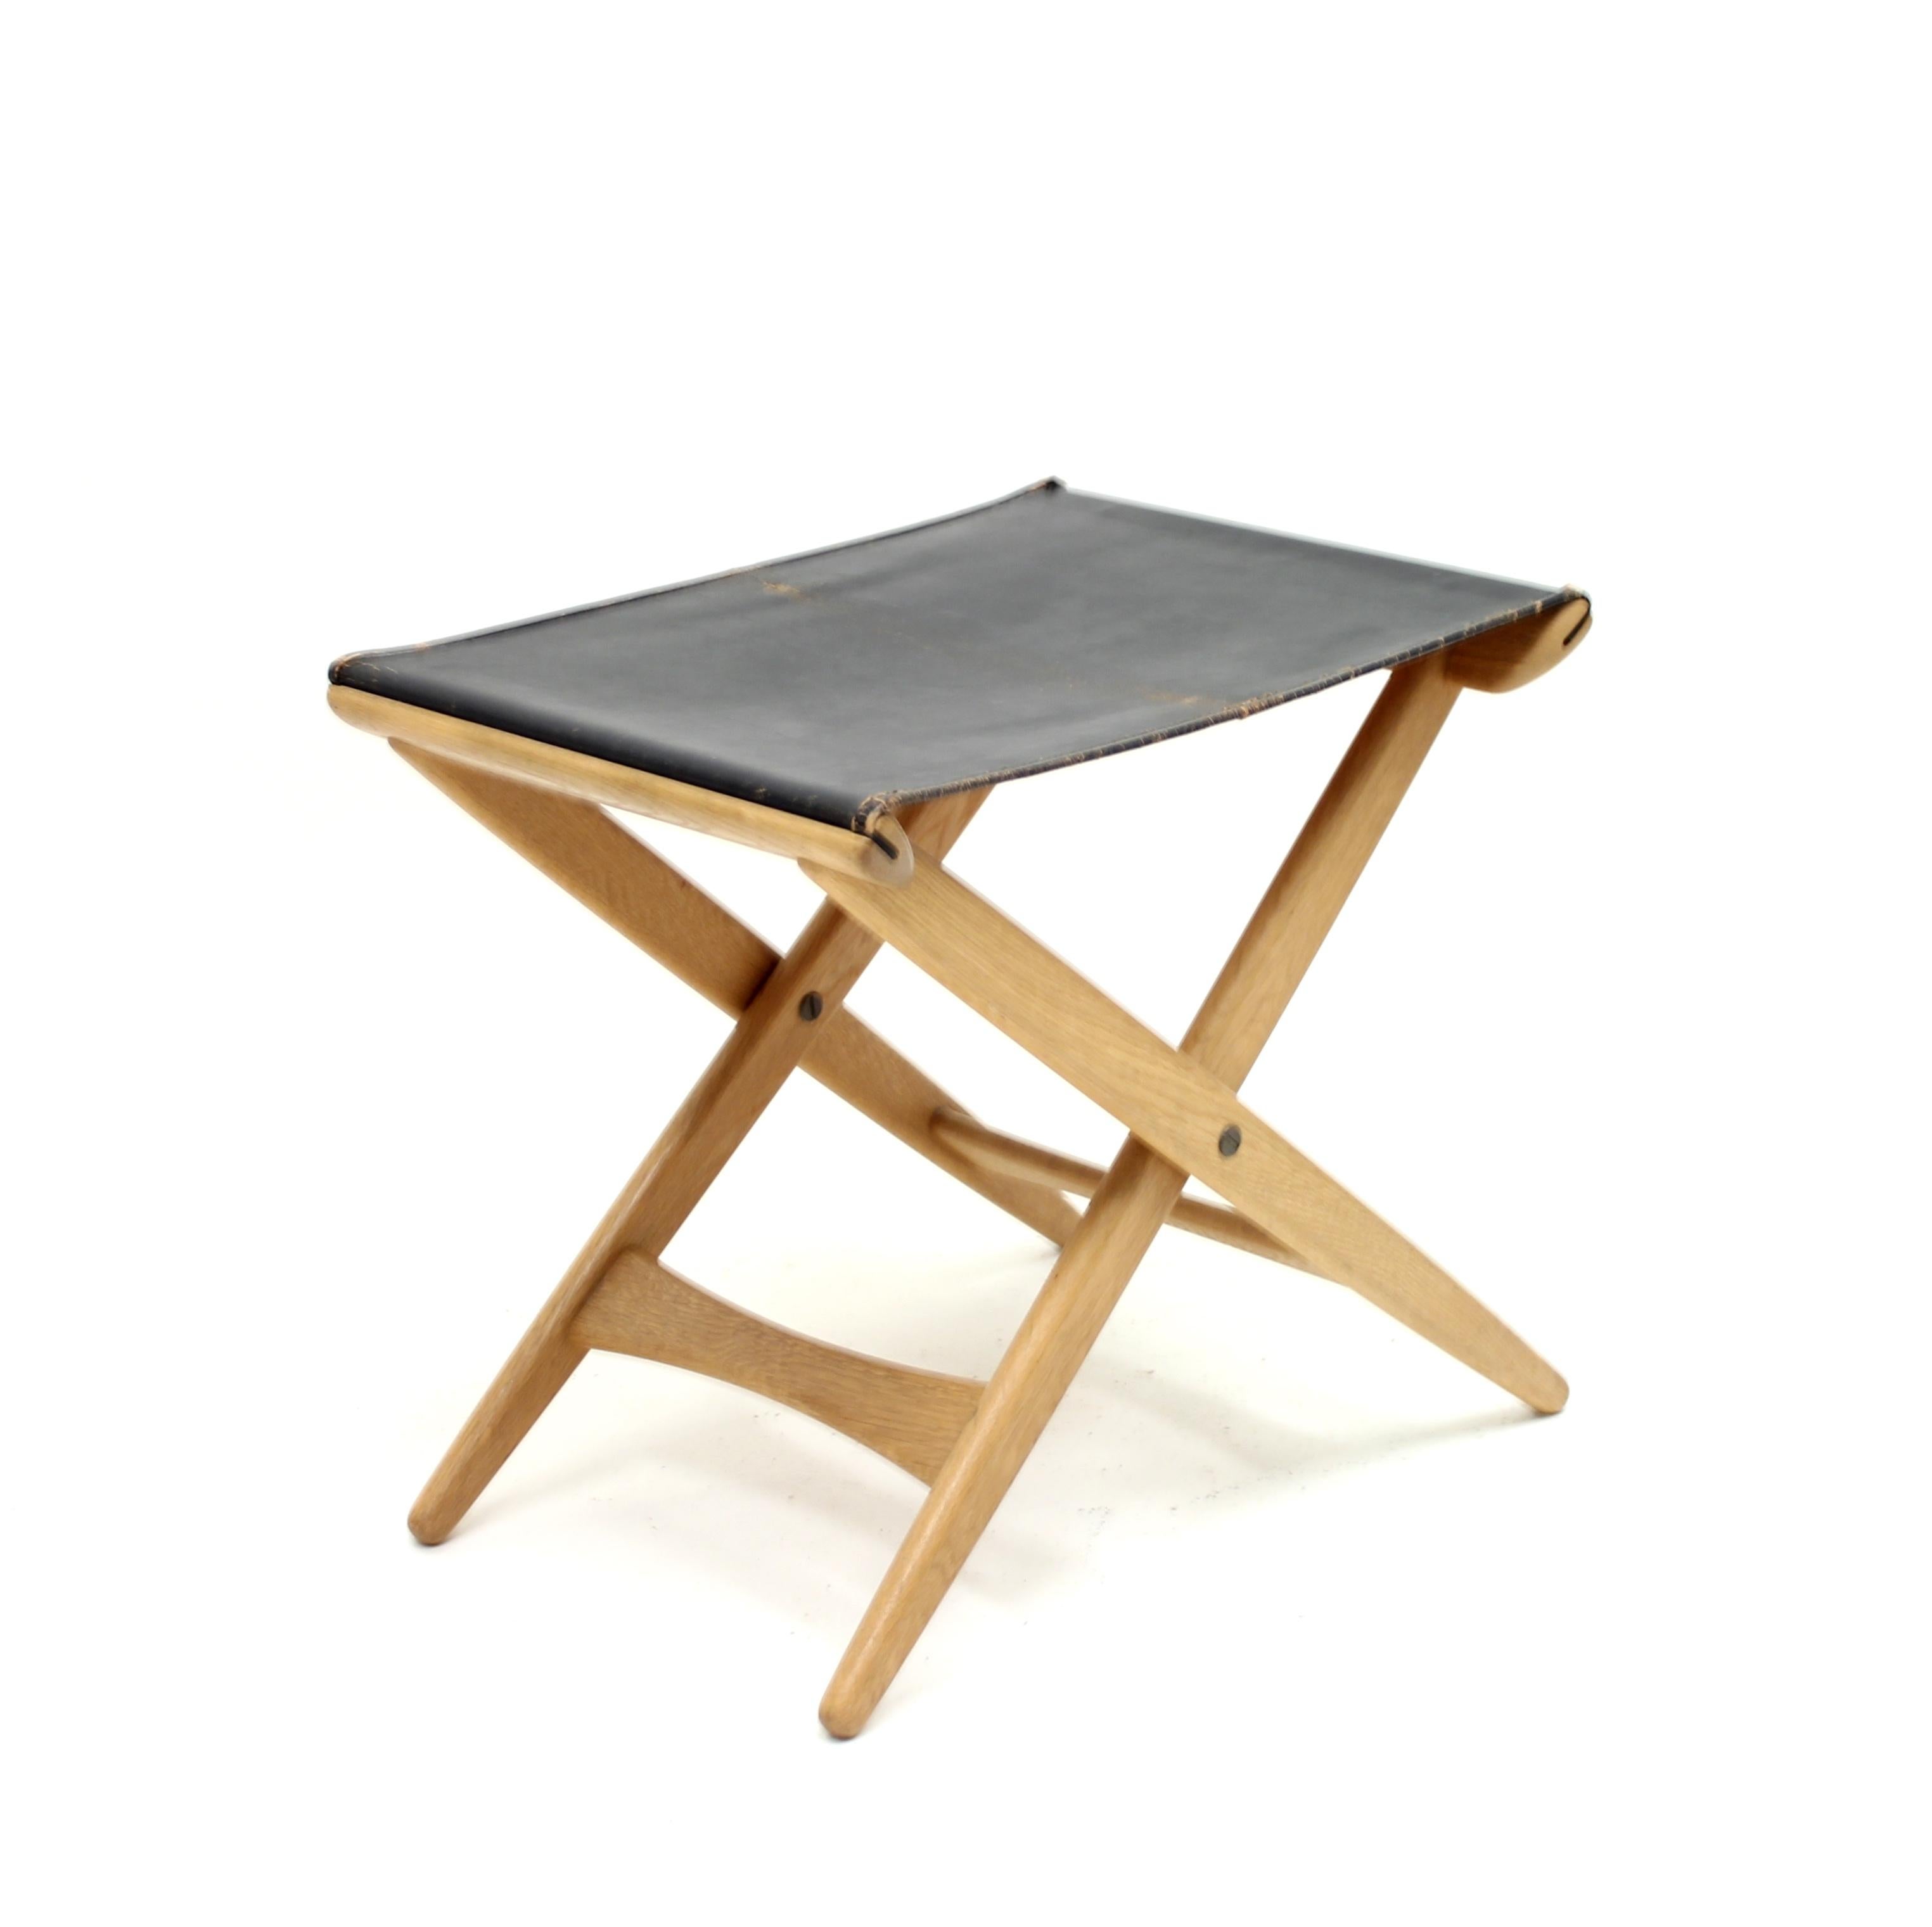 Folding stool designed by Östen Kristiansson for his own firm Luxus in the 1960s. Leather seat on an oak frame. Very good vintage condition with minor ware. A little bit of patina on the original leather.